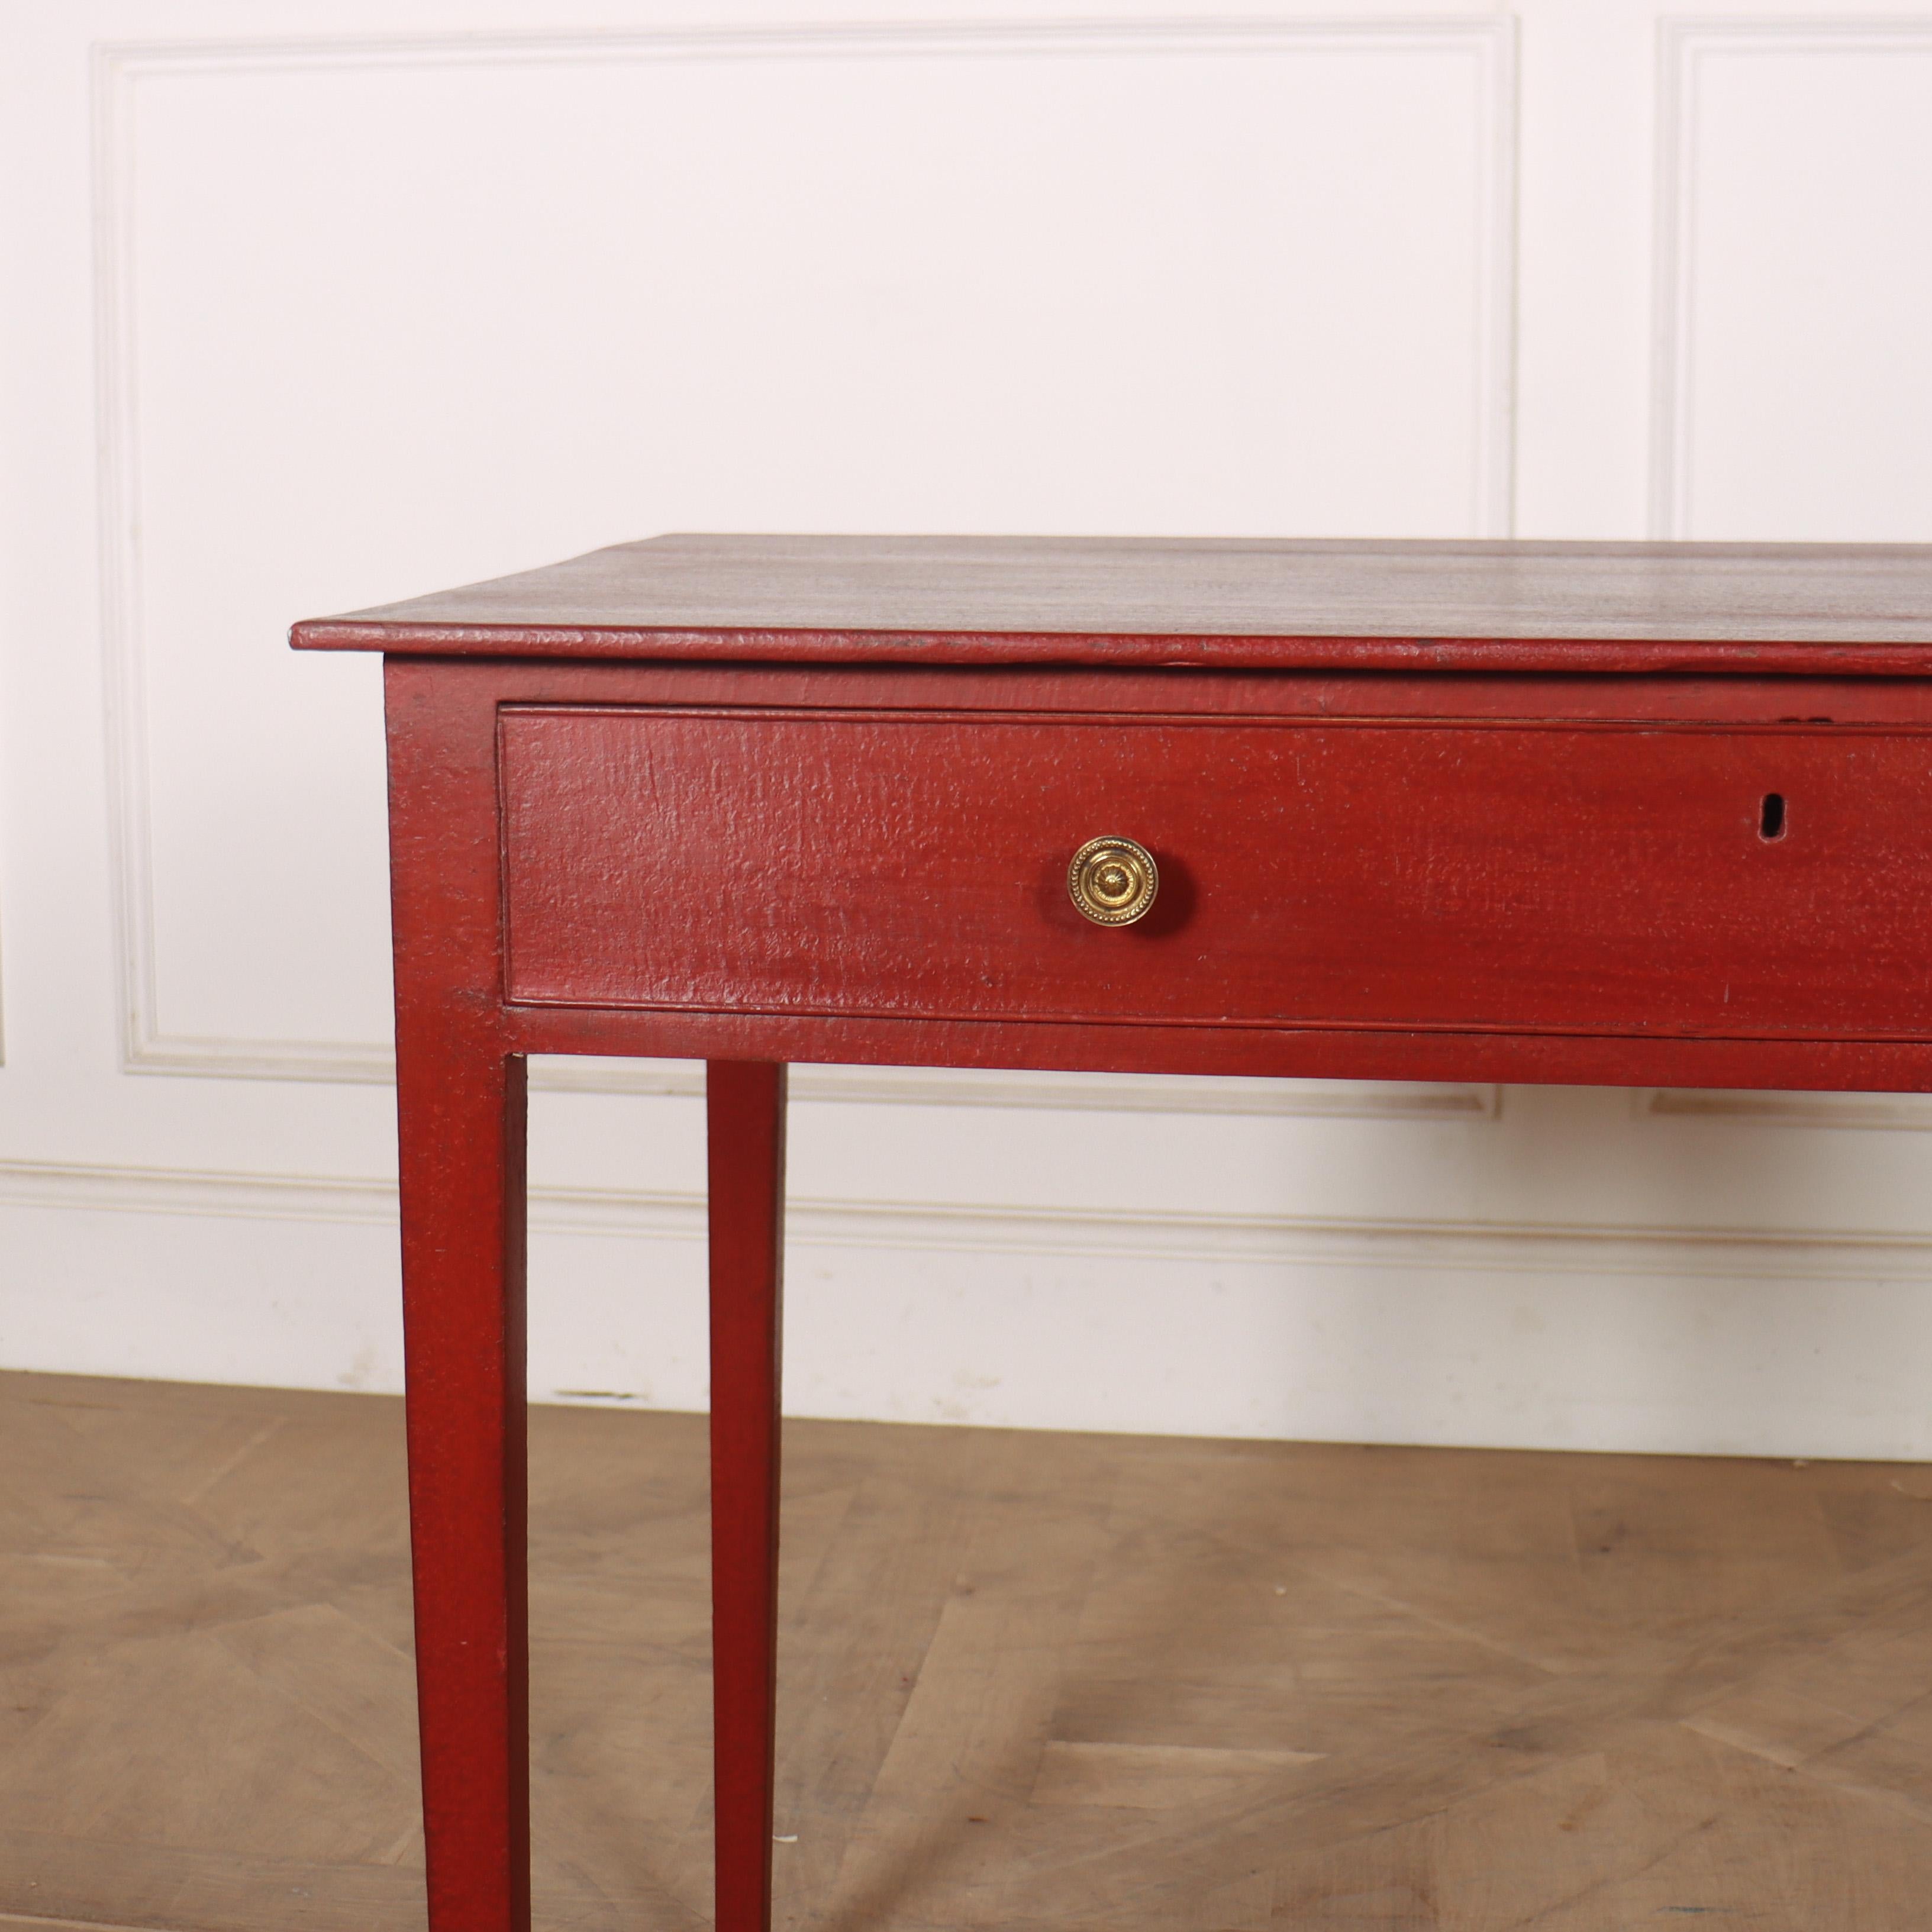 Late 19th C painted pine one drawer lamp table. 1890.

Reference: 8240

Dimensions
36 inches (91 cms) Wide
21 inches (53 cms) Deep
28.5 inches (72 cms) High